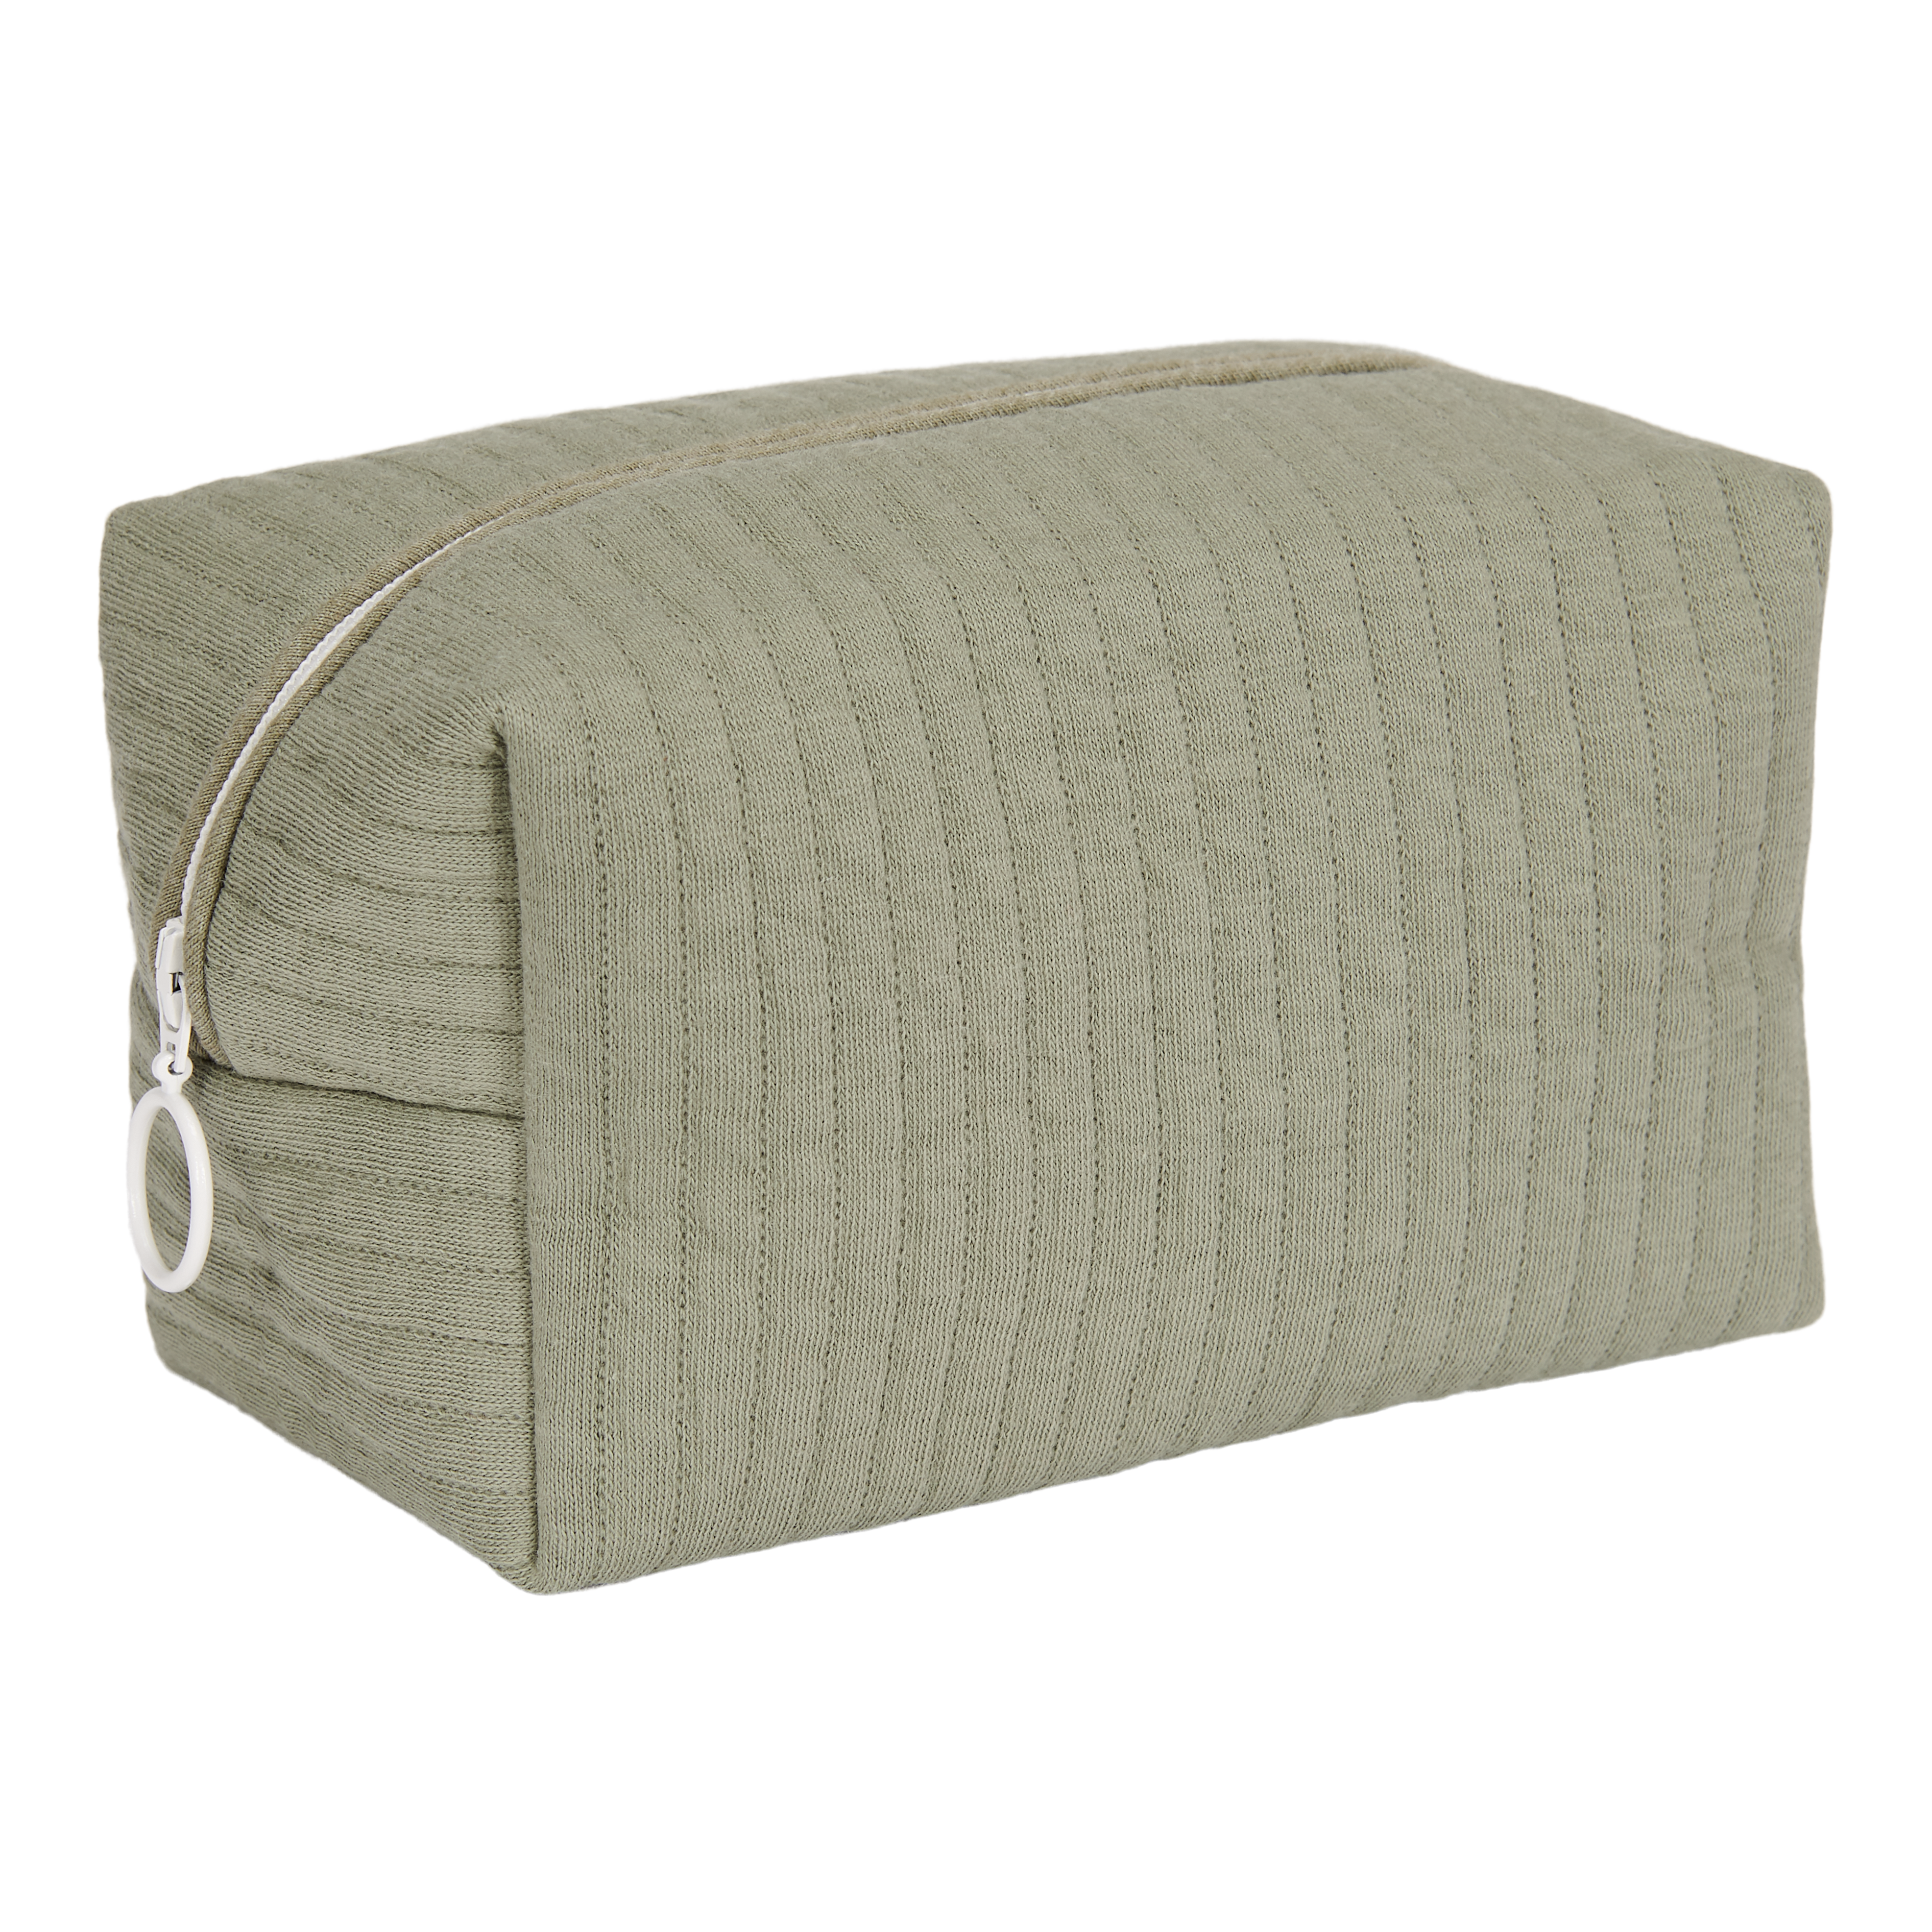 Pure Olive toiletry bag - Little dutch